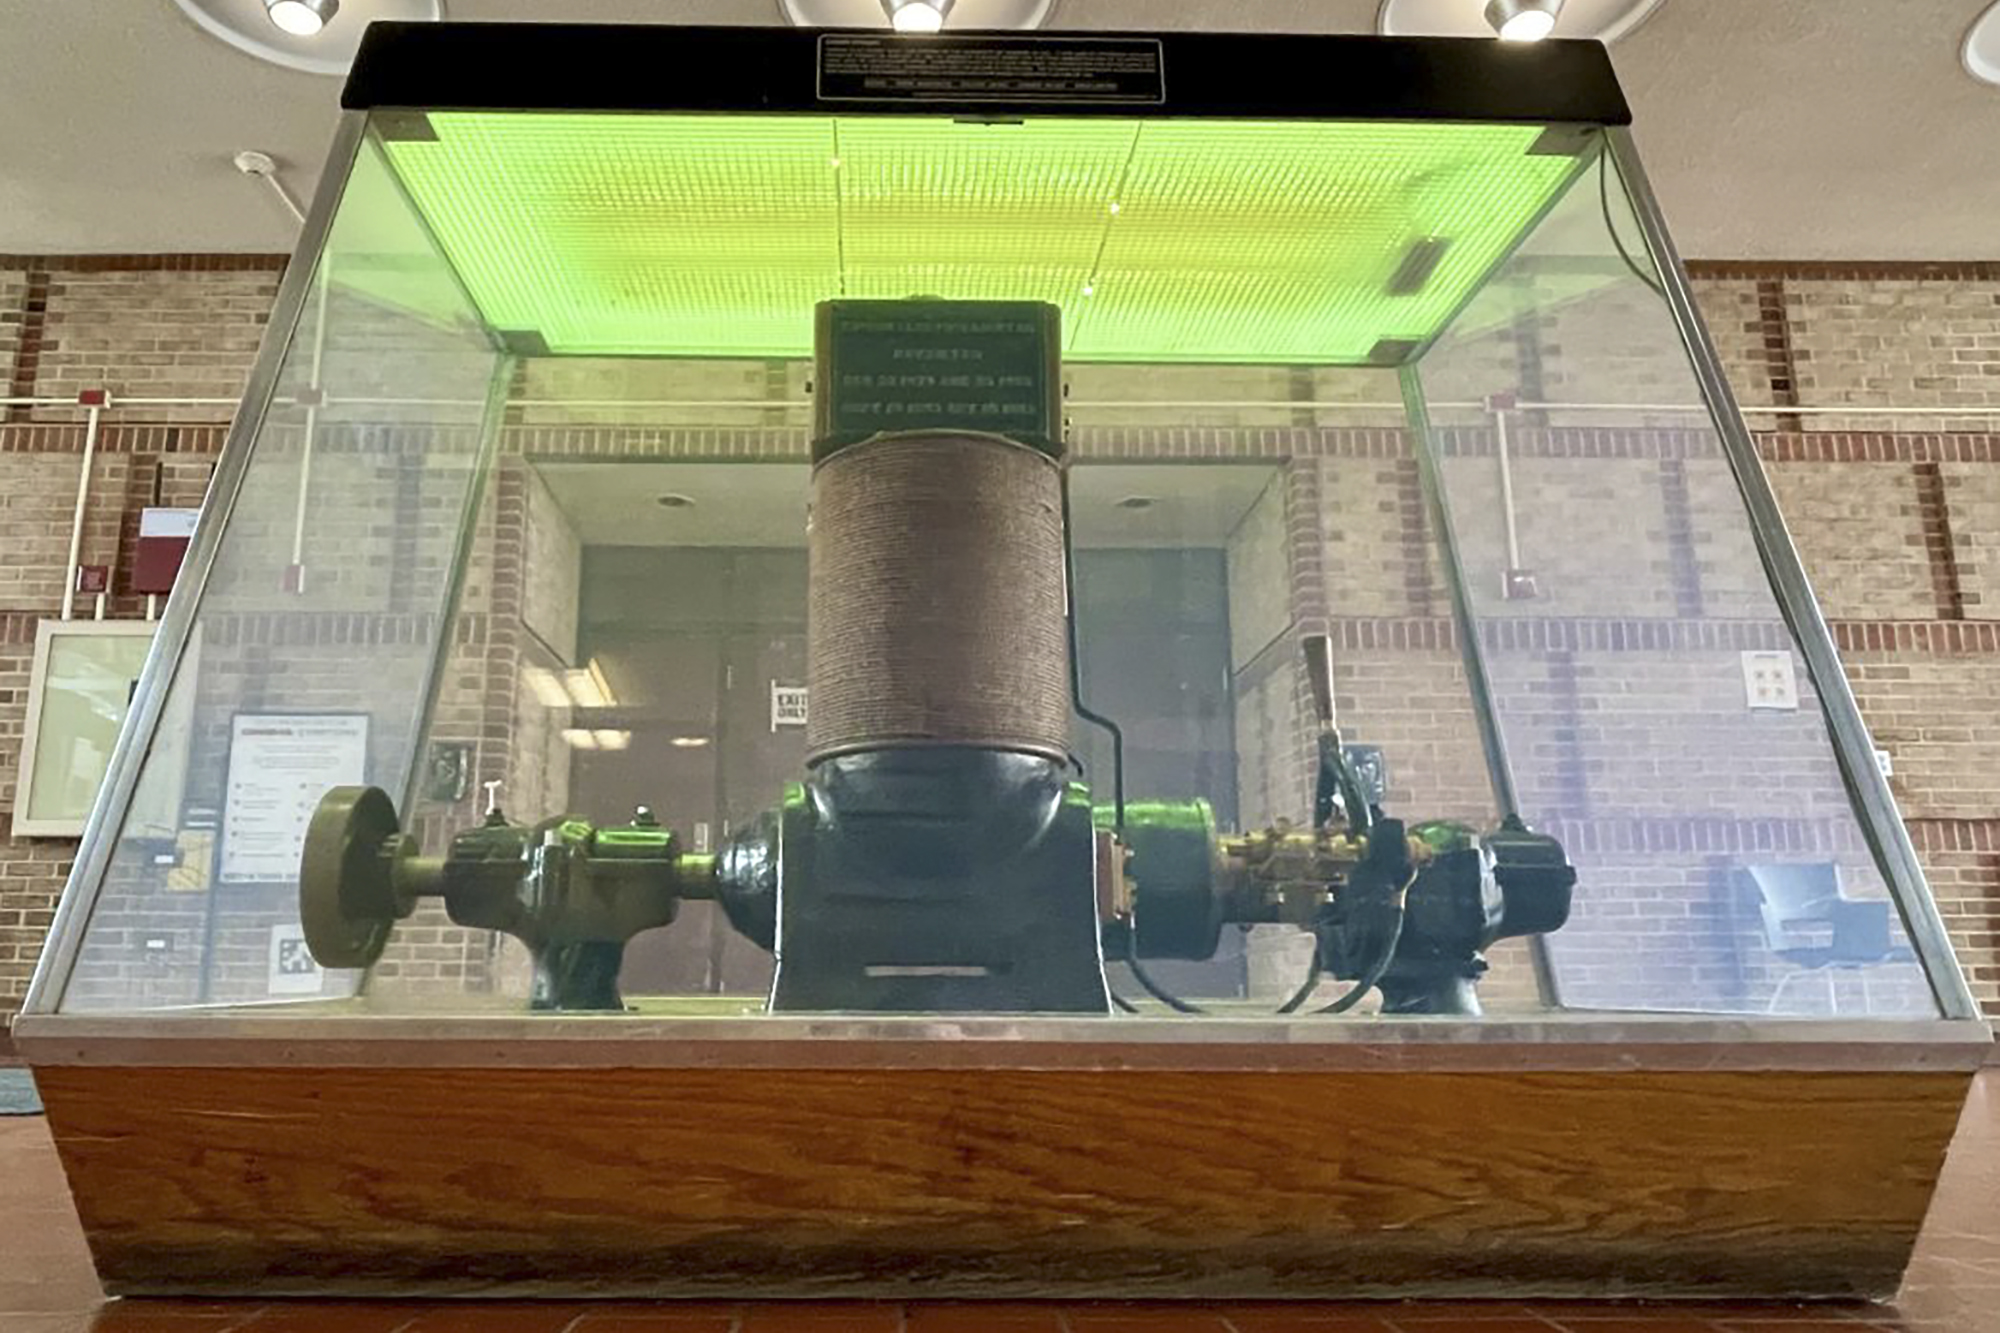 The University of Missouri’s original electric dynamo is on display in the College of Engineering’s Naka Hall.